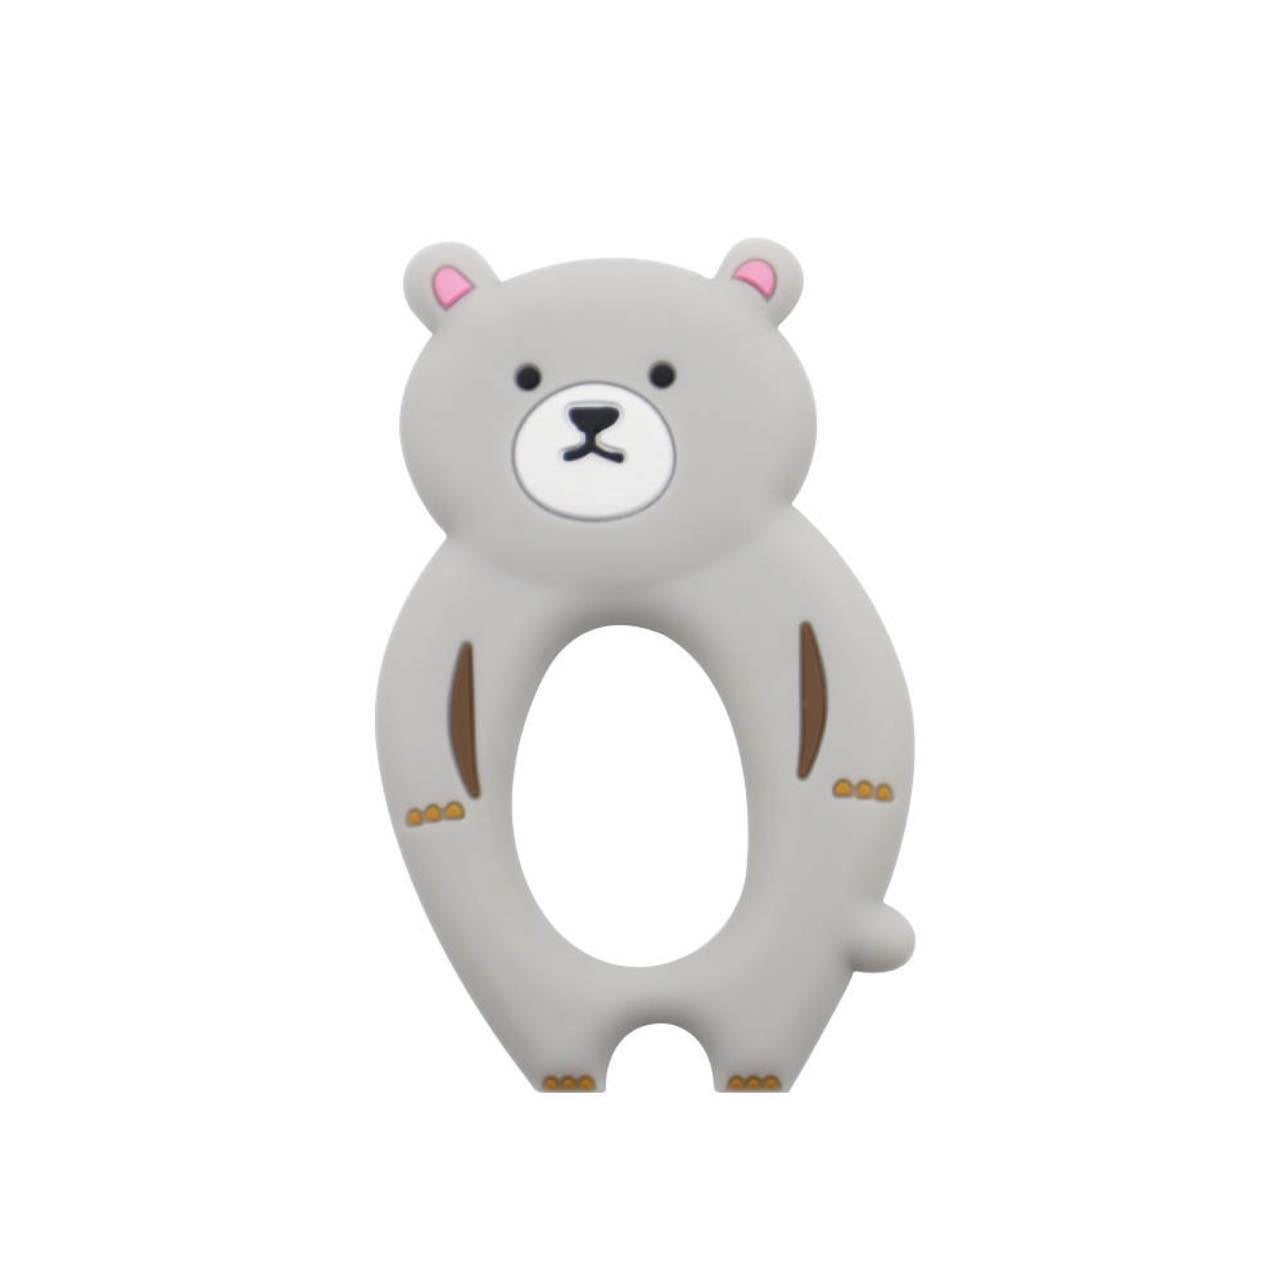 Introduce your baby to the Teddy Bear 👶 Silicone Teething Ring! This  super soft ❤️ silicone teething ring is perfect for relieving the discomfort of their 🦷 gums